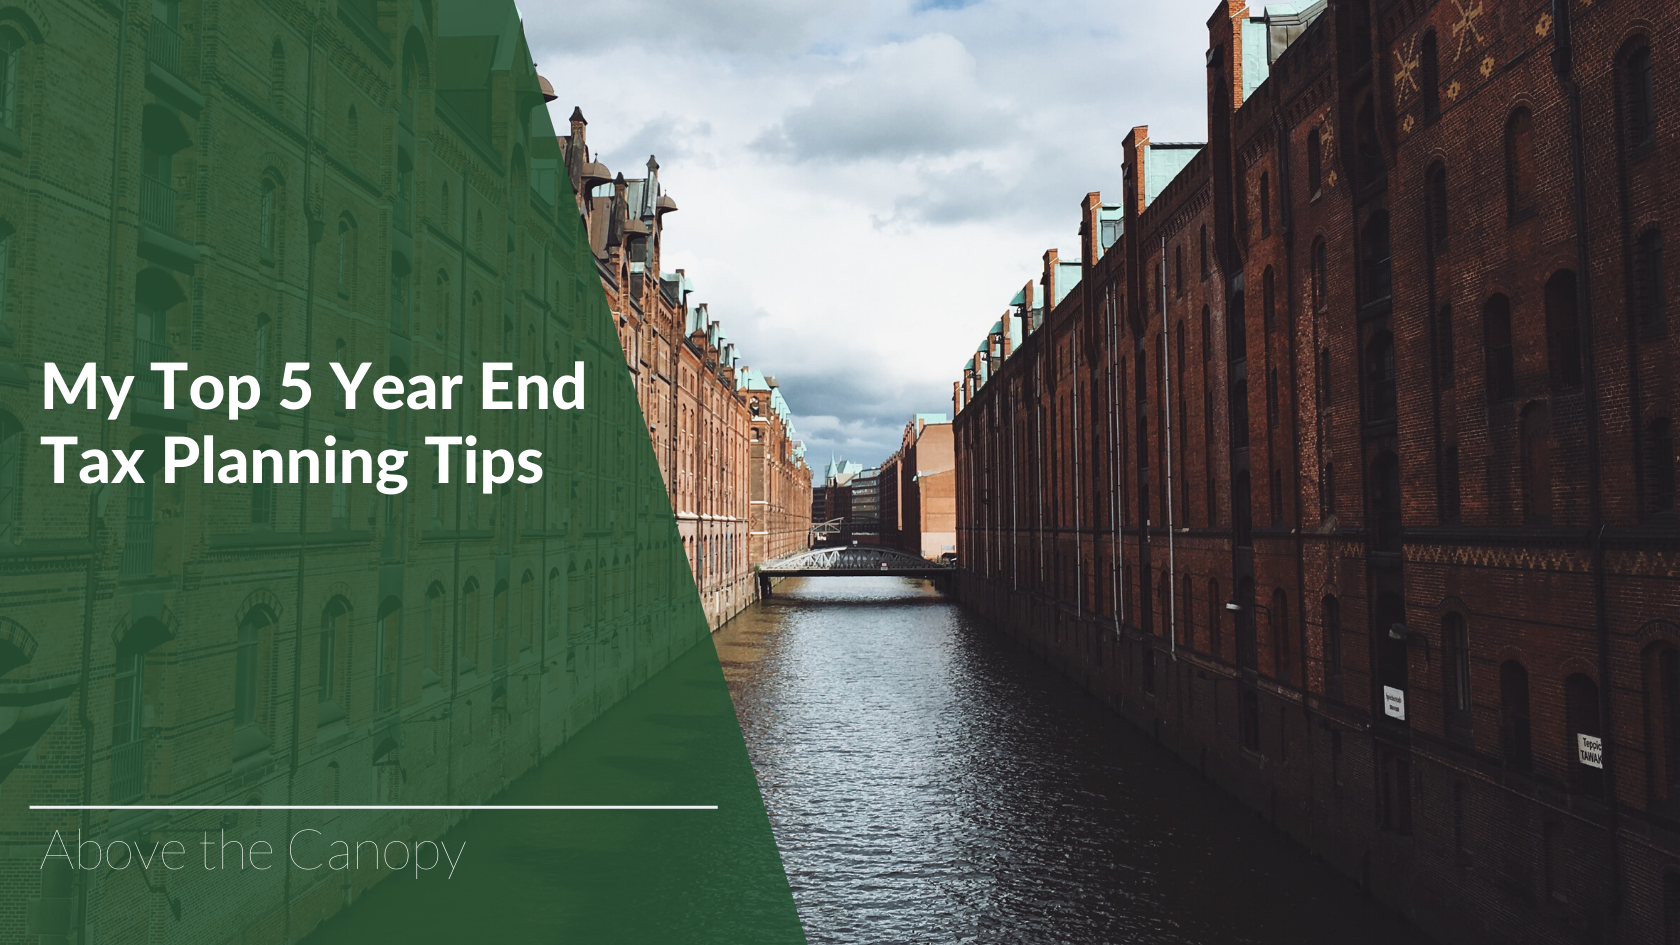 My Top 5 Year End Tax Planning Tips